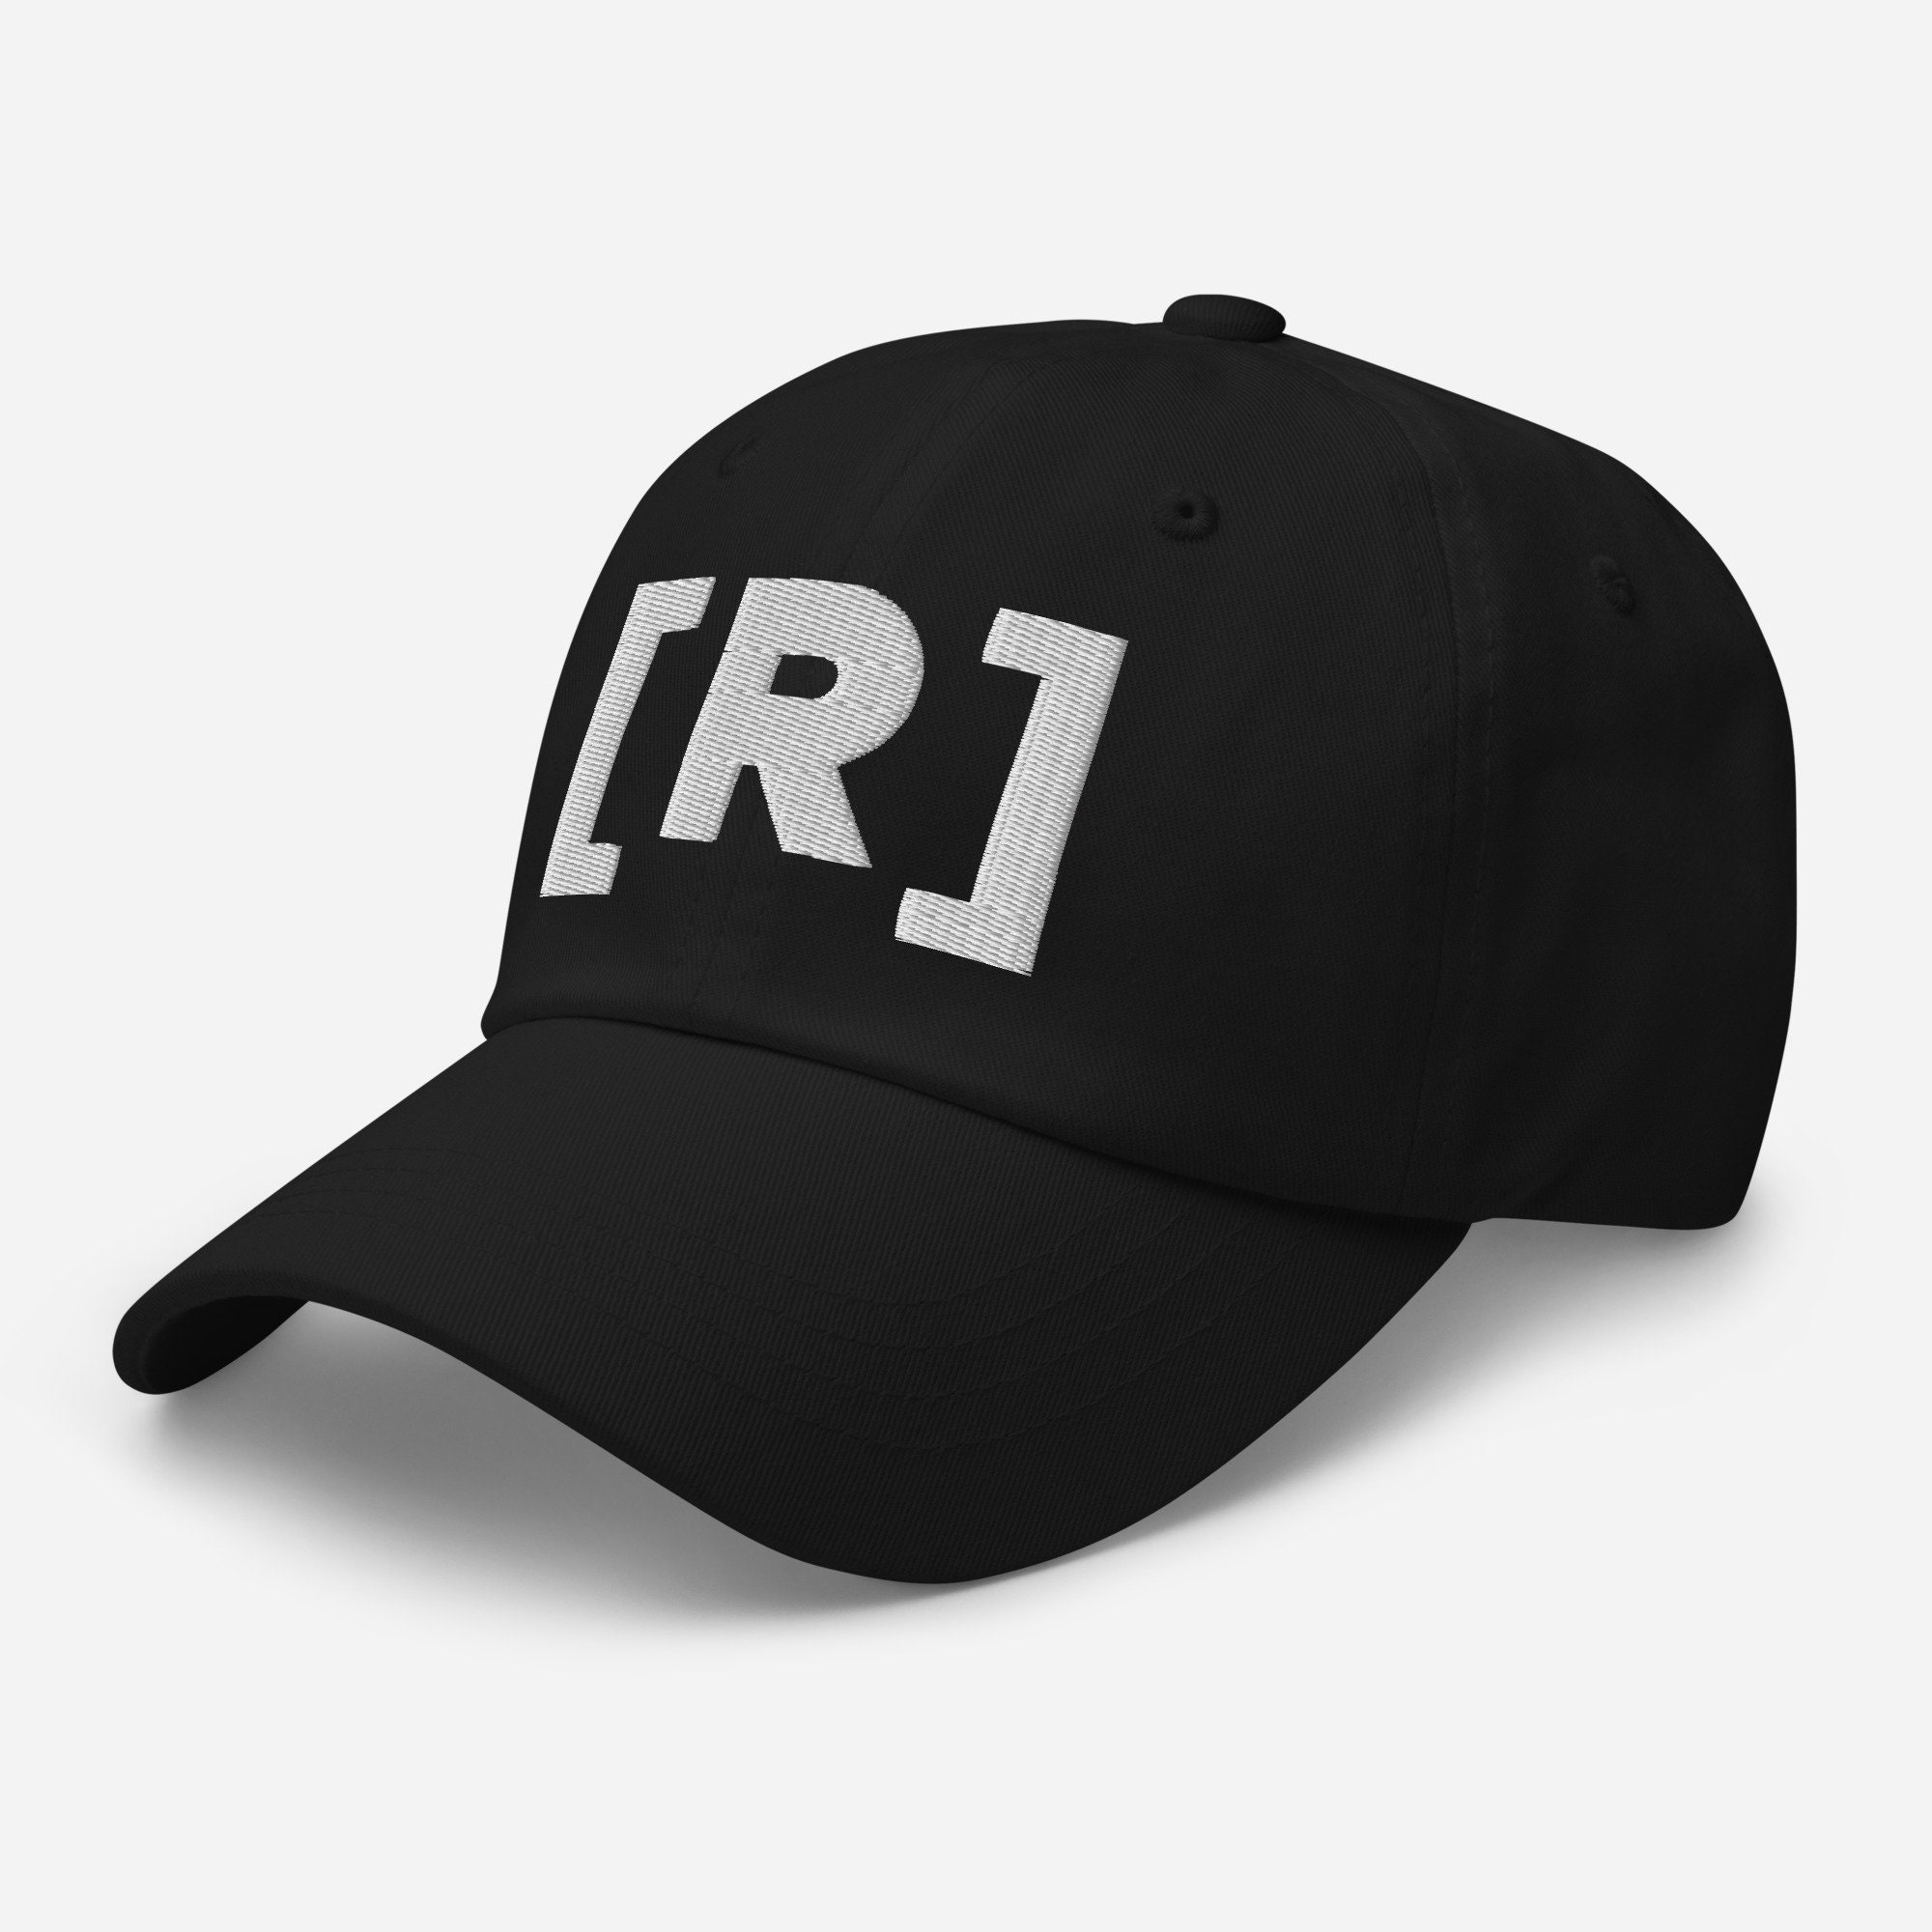 Residente Hat [R] Embroidered Dad